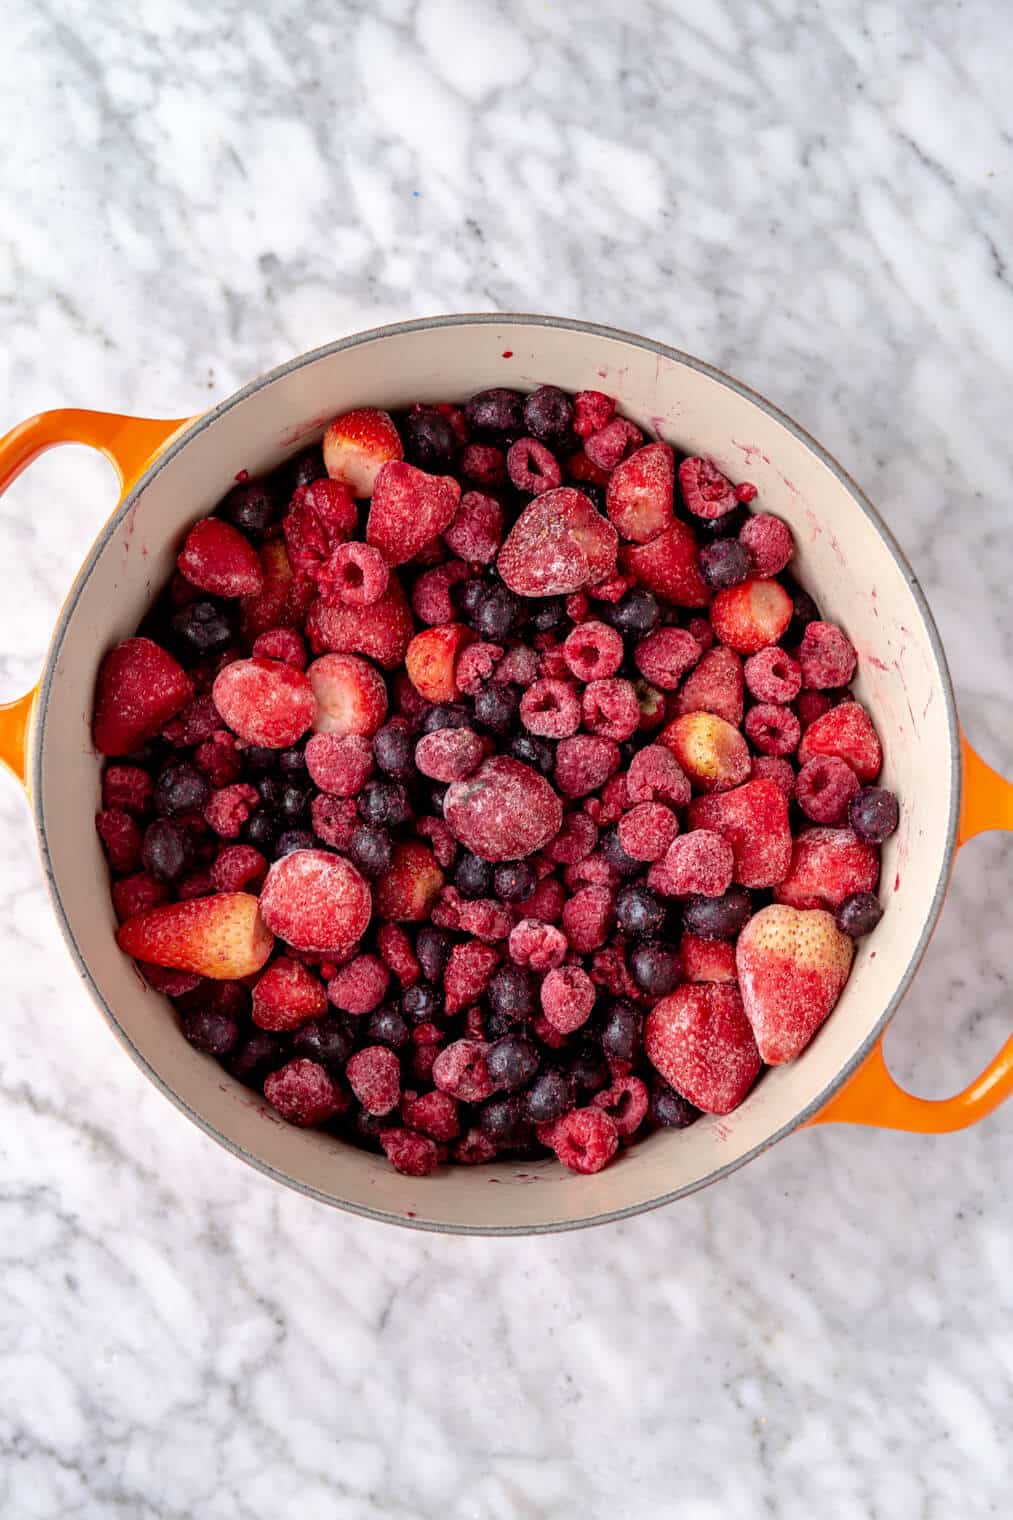 Frozen berries in a white enameled dutch oven with orange handles on a grey and white marble surface.